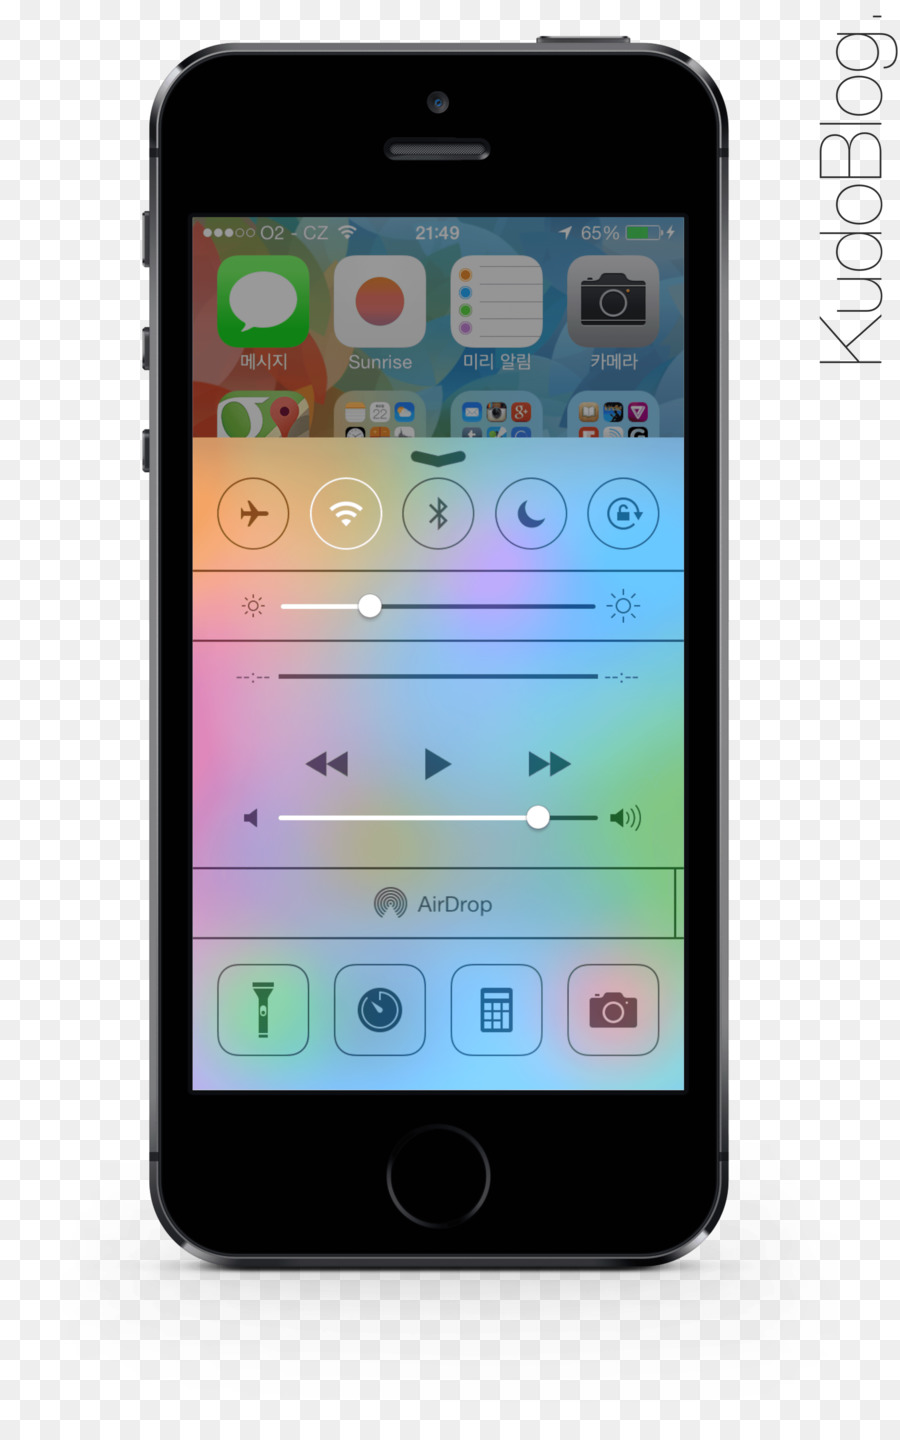 Funktion Handy Smartphone iPhone 4 iPhone 5s - Control Center